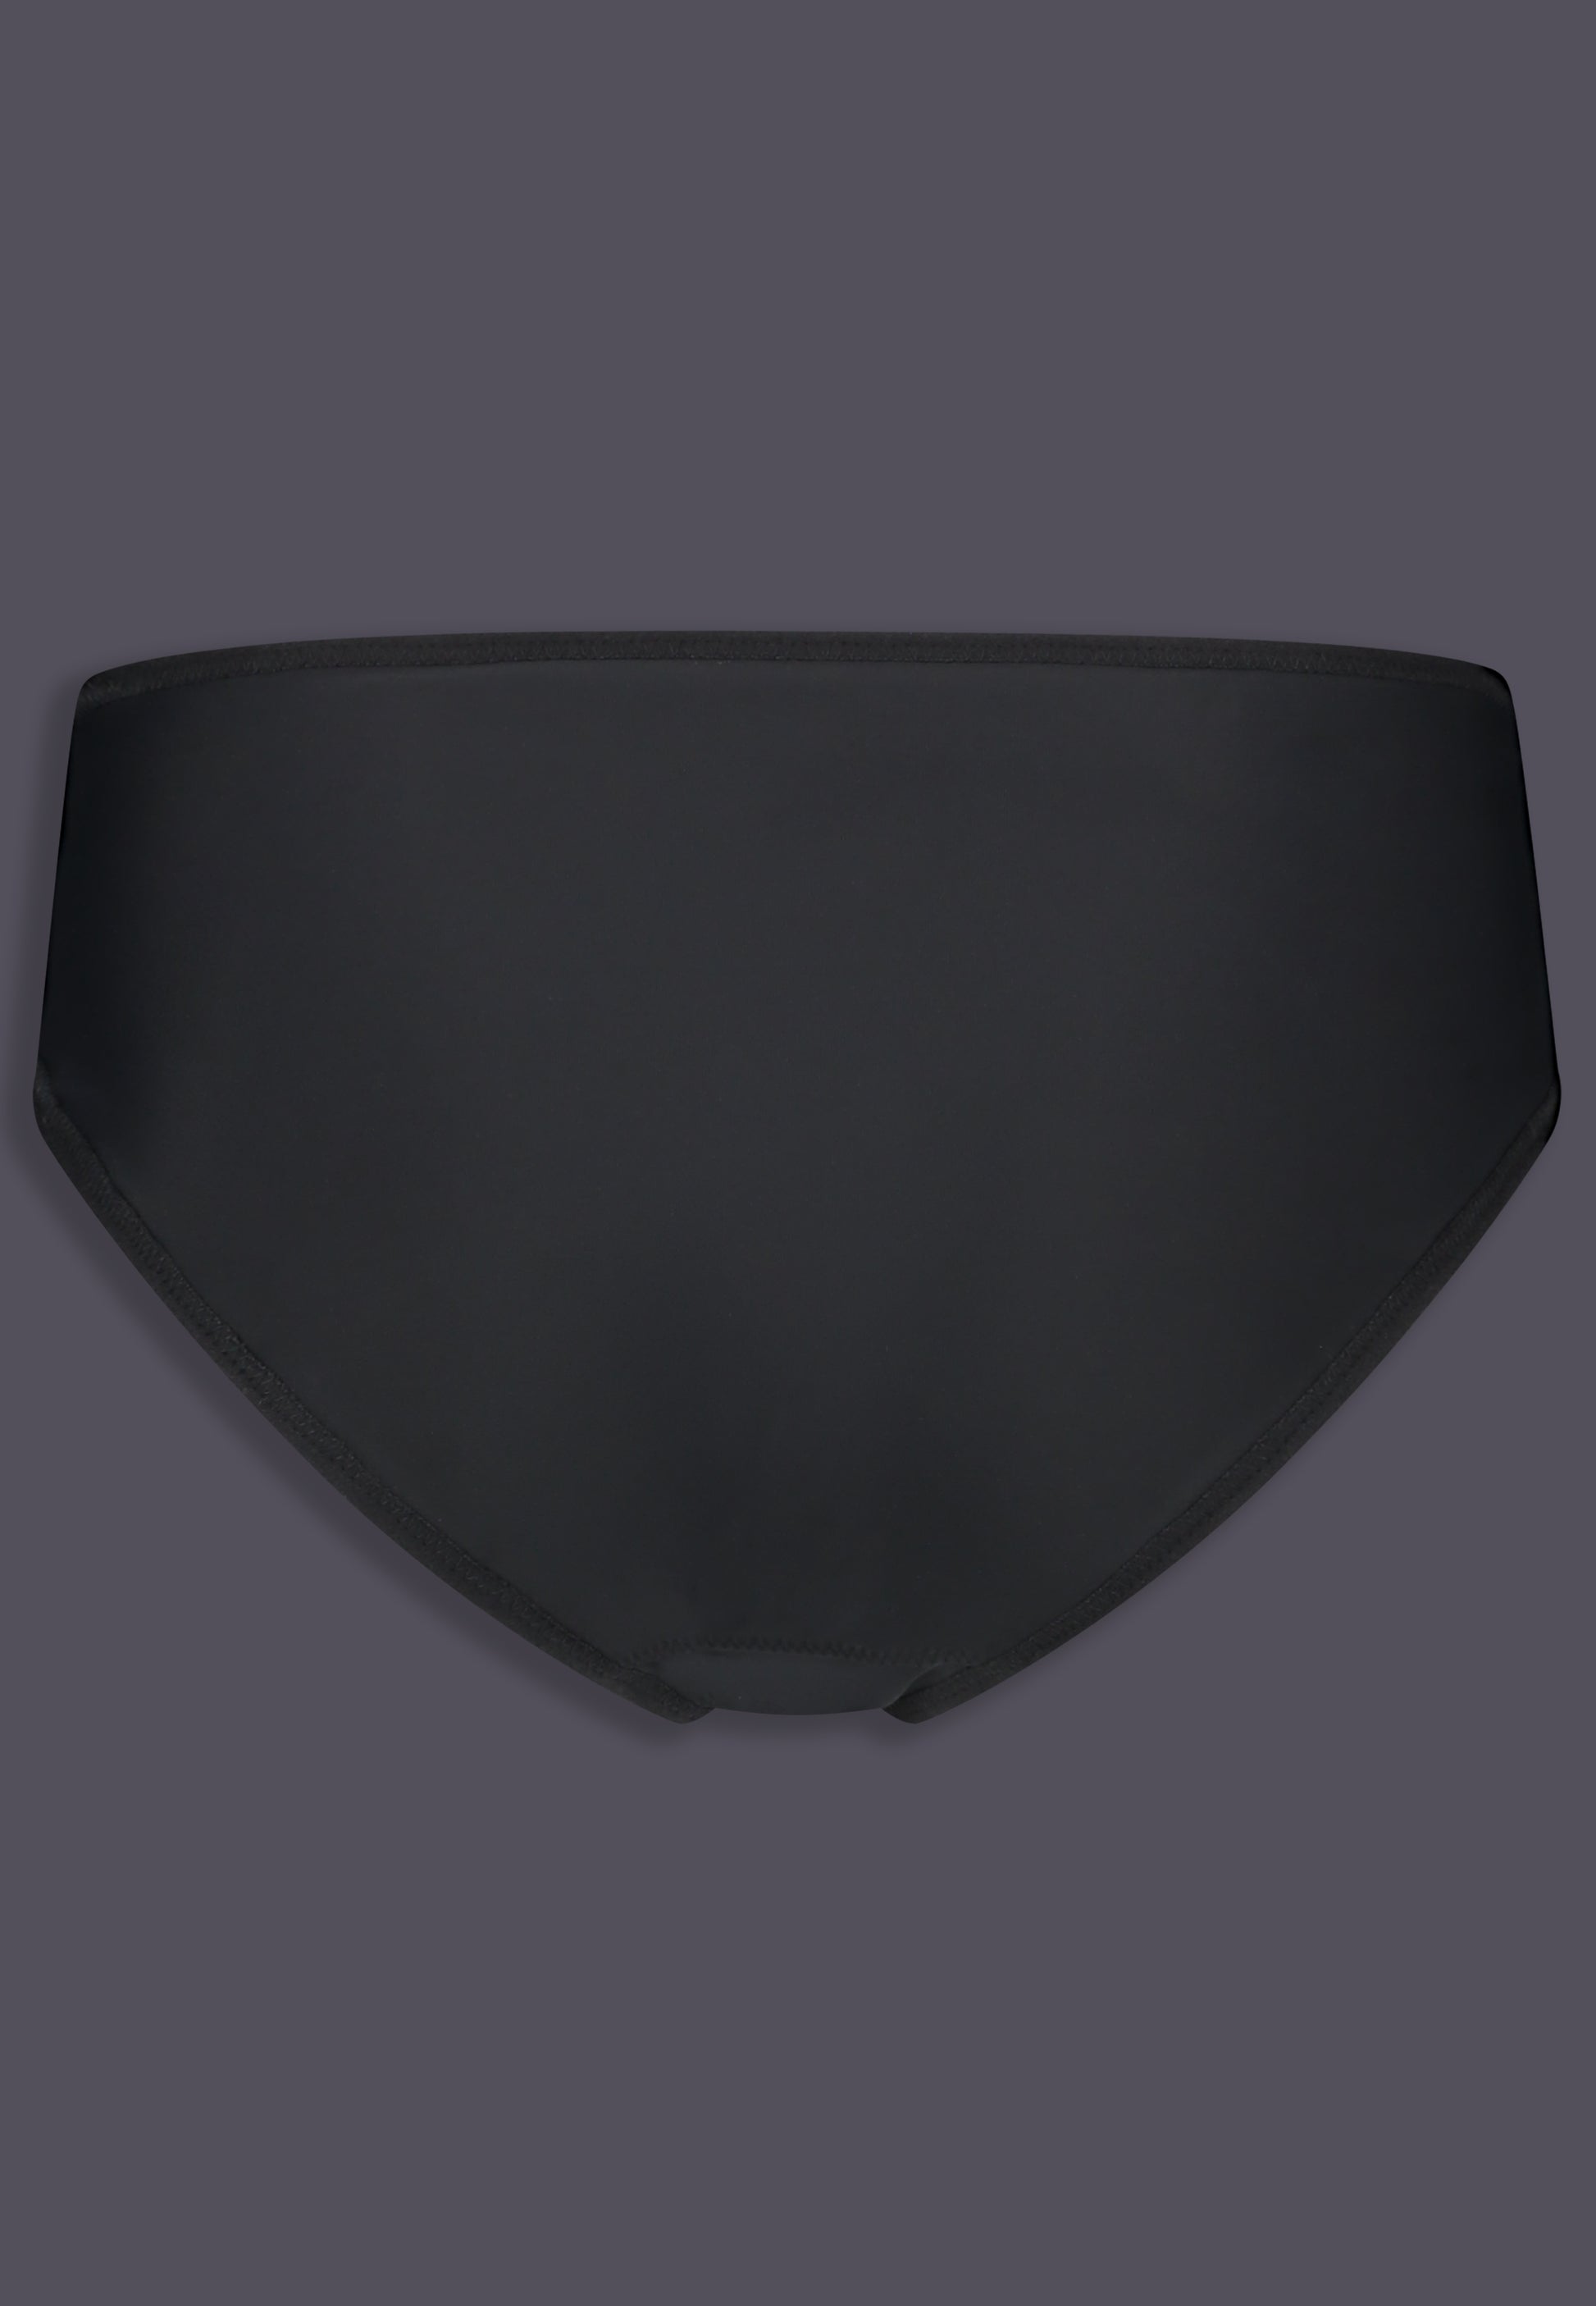 Liberare The Cheeky Tanga in Black (Side-Opening Underwear with Velcro) on  Marmalade